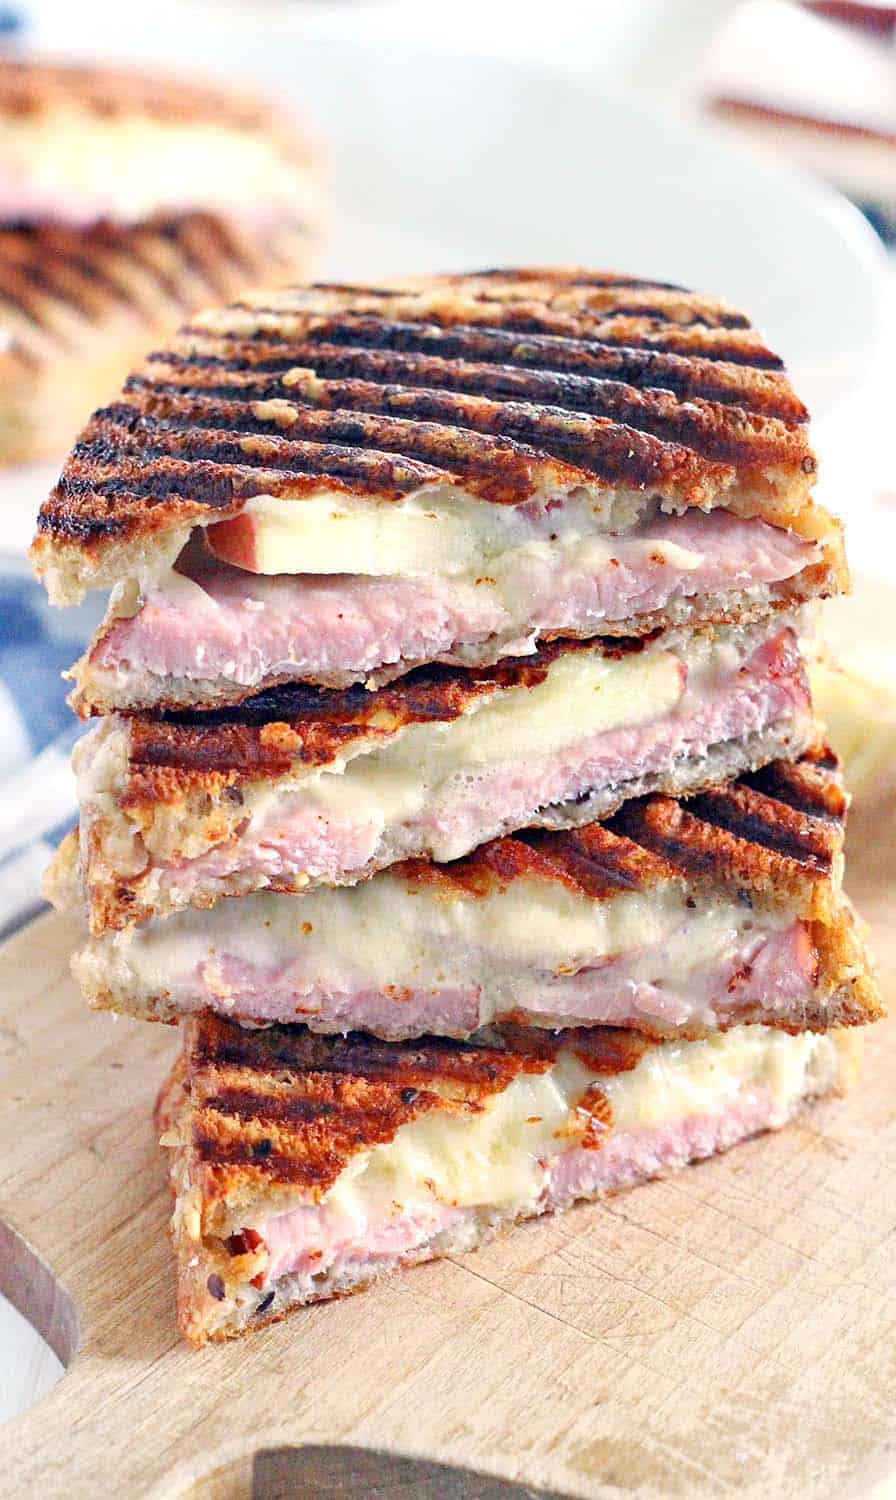 These ham, apple, and swiss panini are the perfect fall sandwich! Use up leftover ham from the holidays and take advantage of the crisp apples the season has to offer.